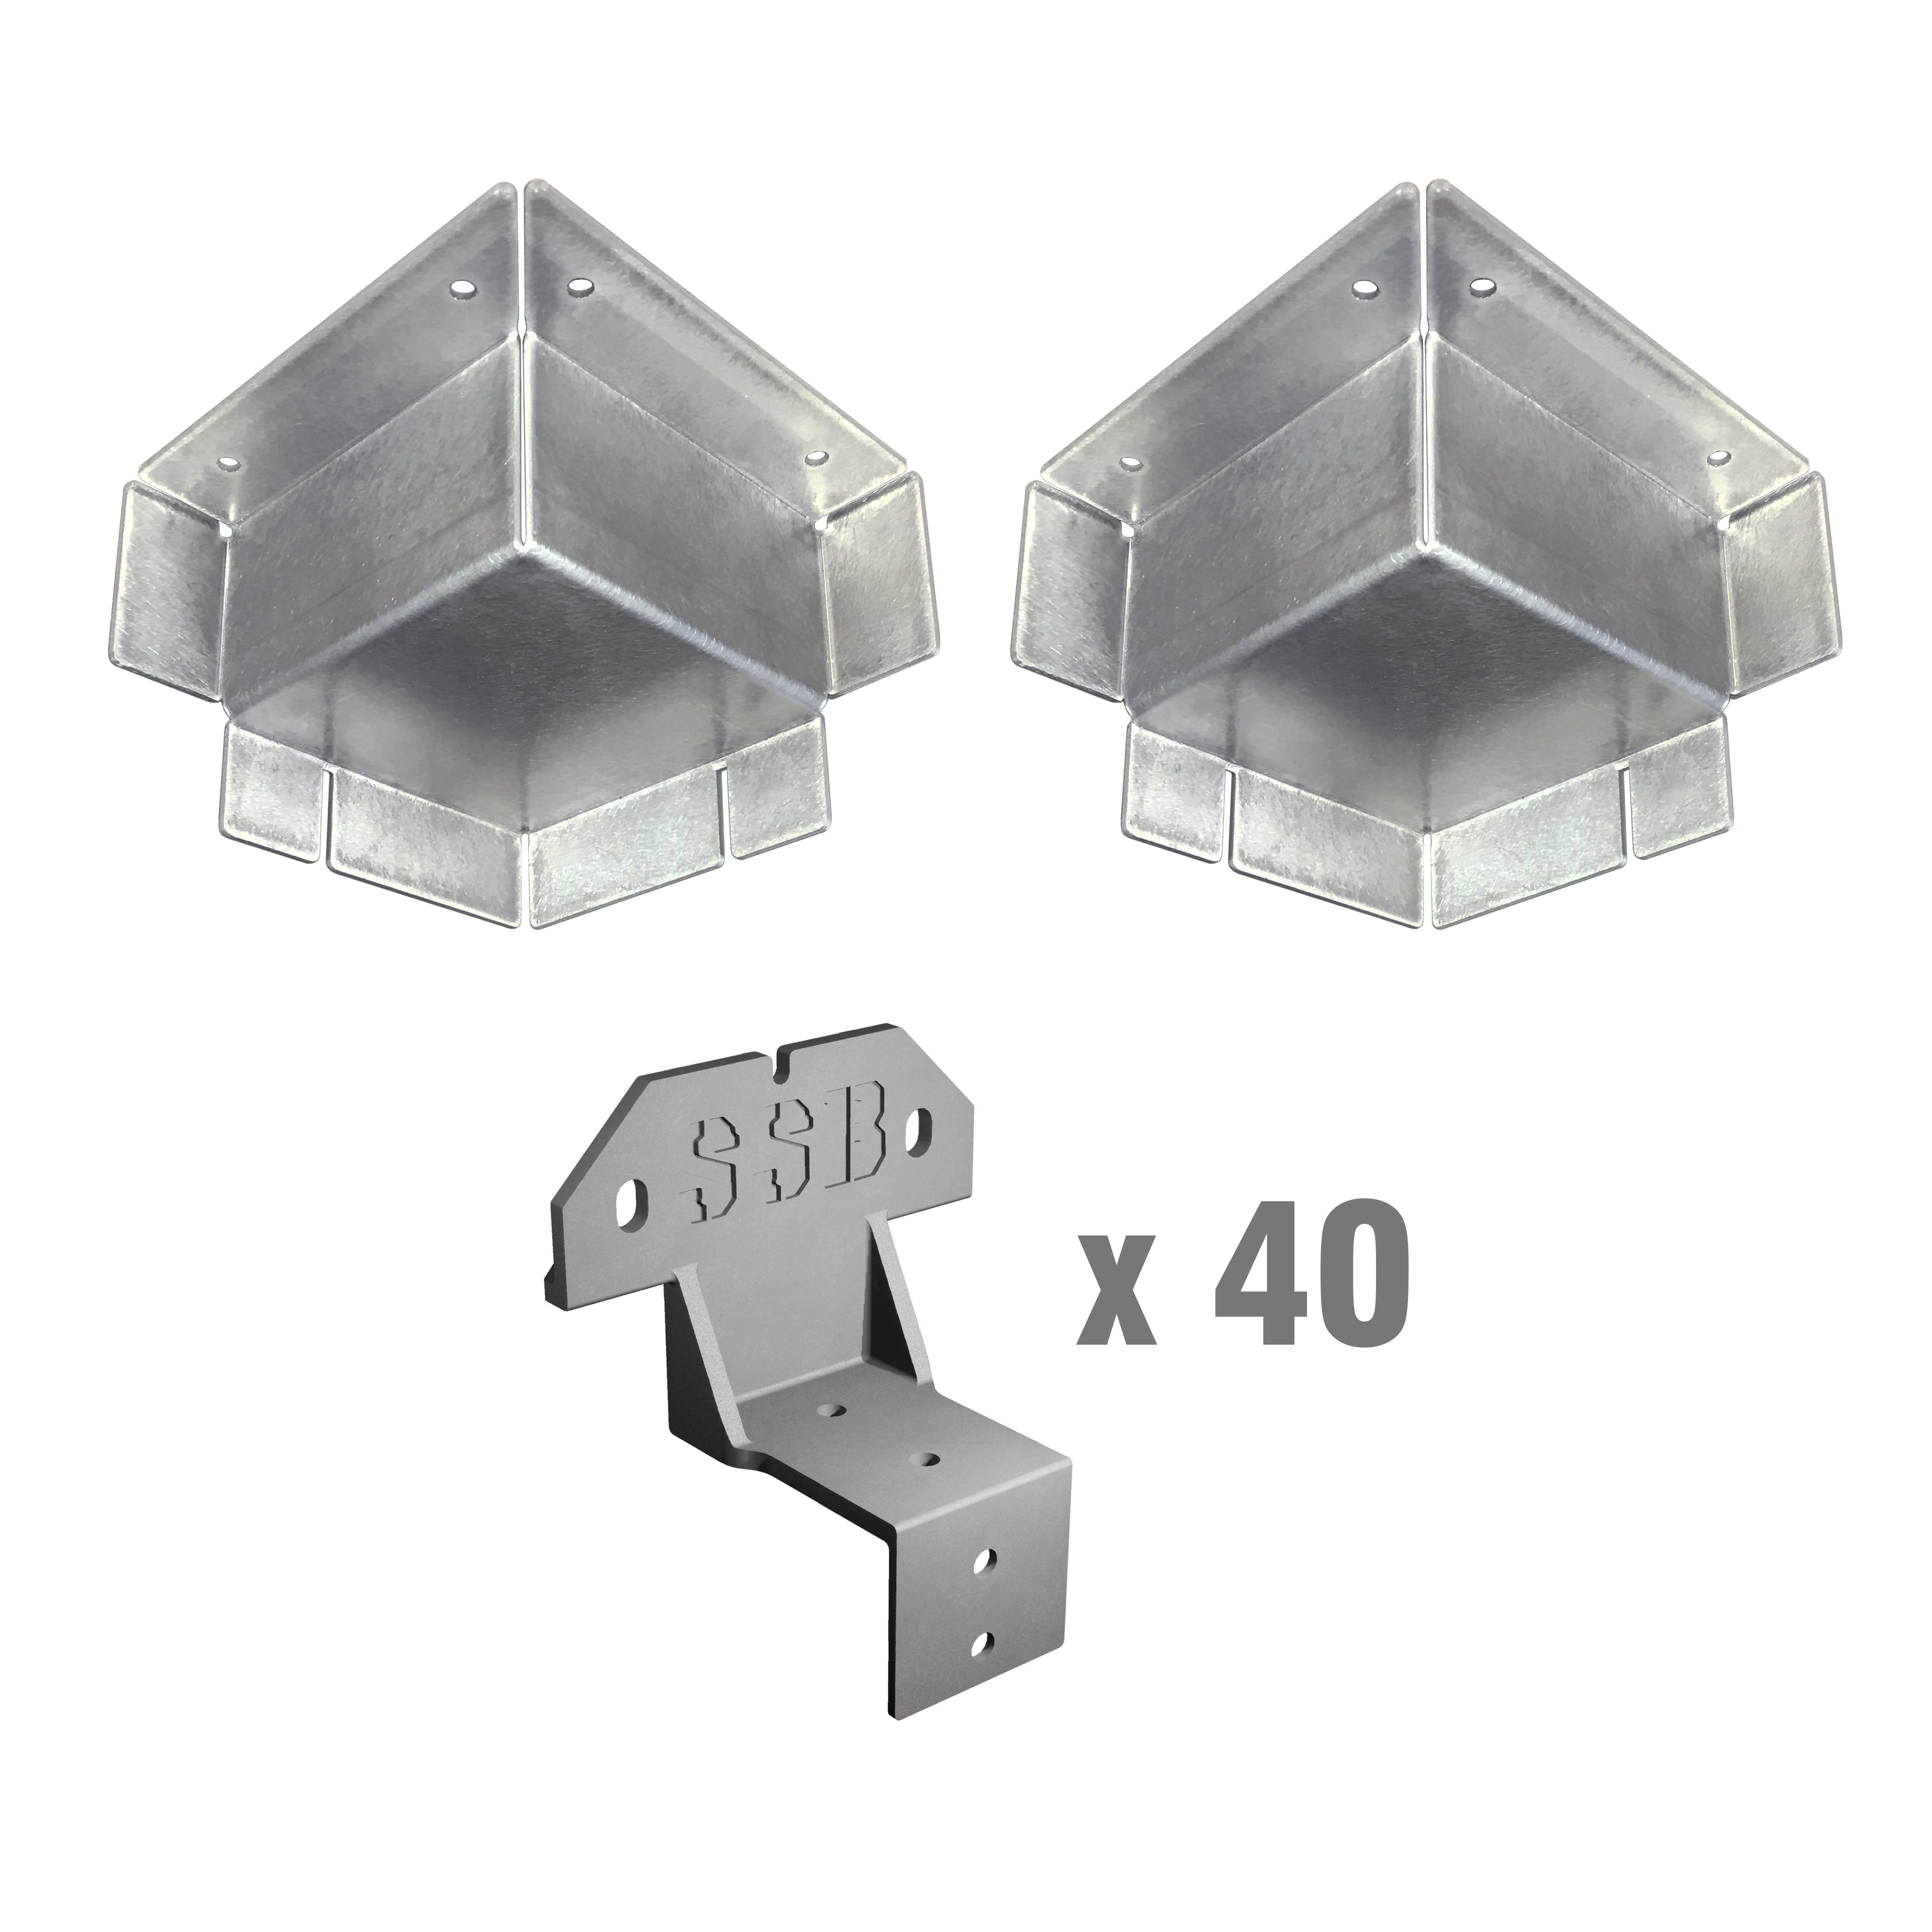 Steel Stud Framing Kit for Shipping Containers/Sea Cans (Composite Brackets) - 2 Corner Casting Covers + Composite Steel Stud Brackets + Hardware